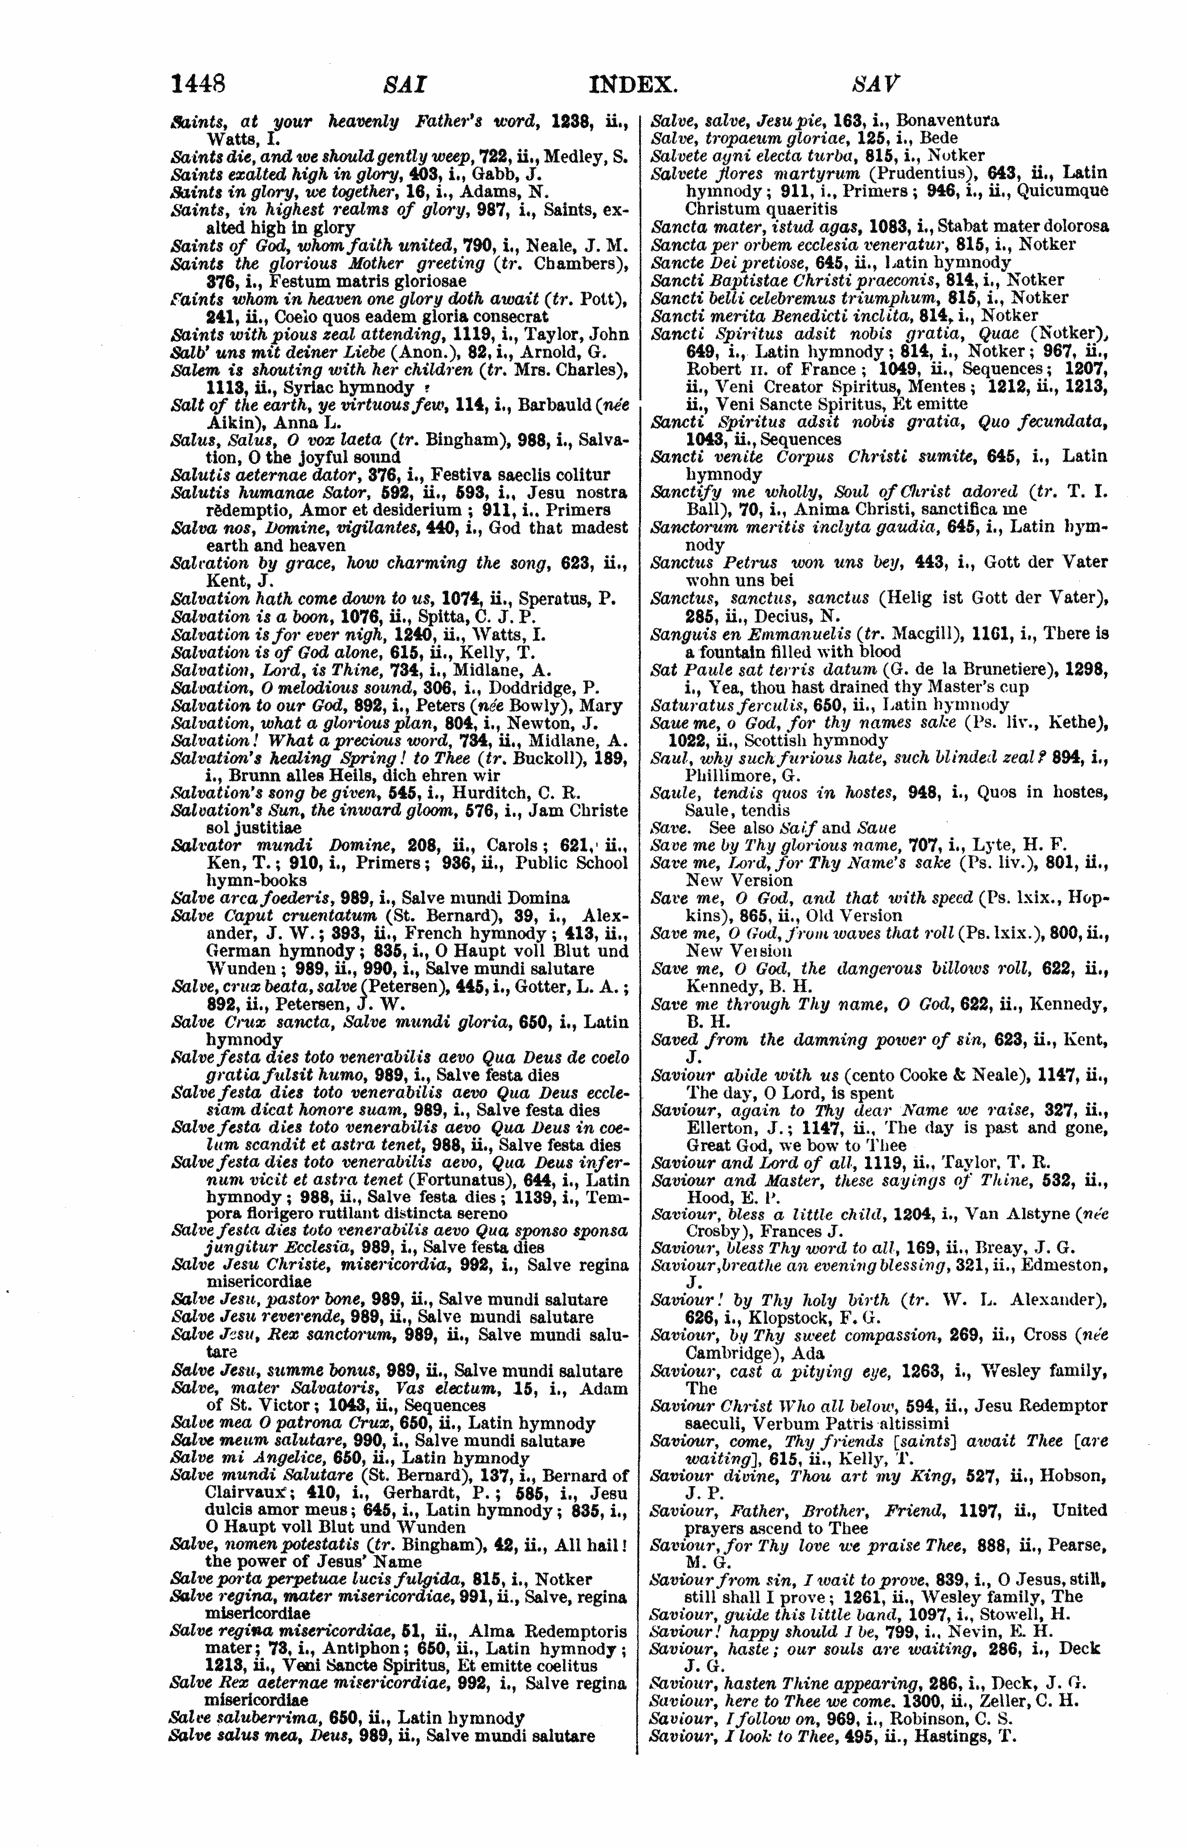 Image of page 1448